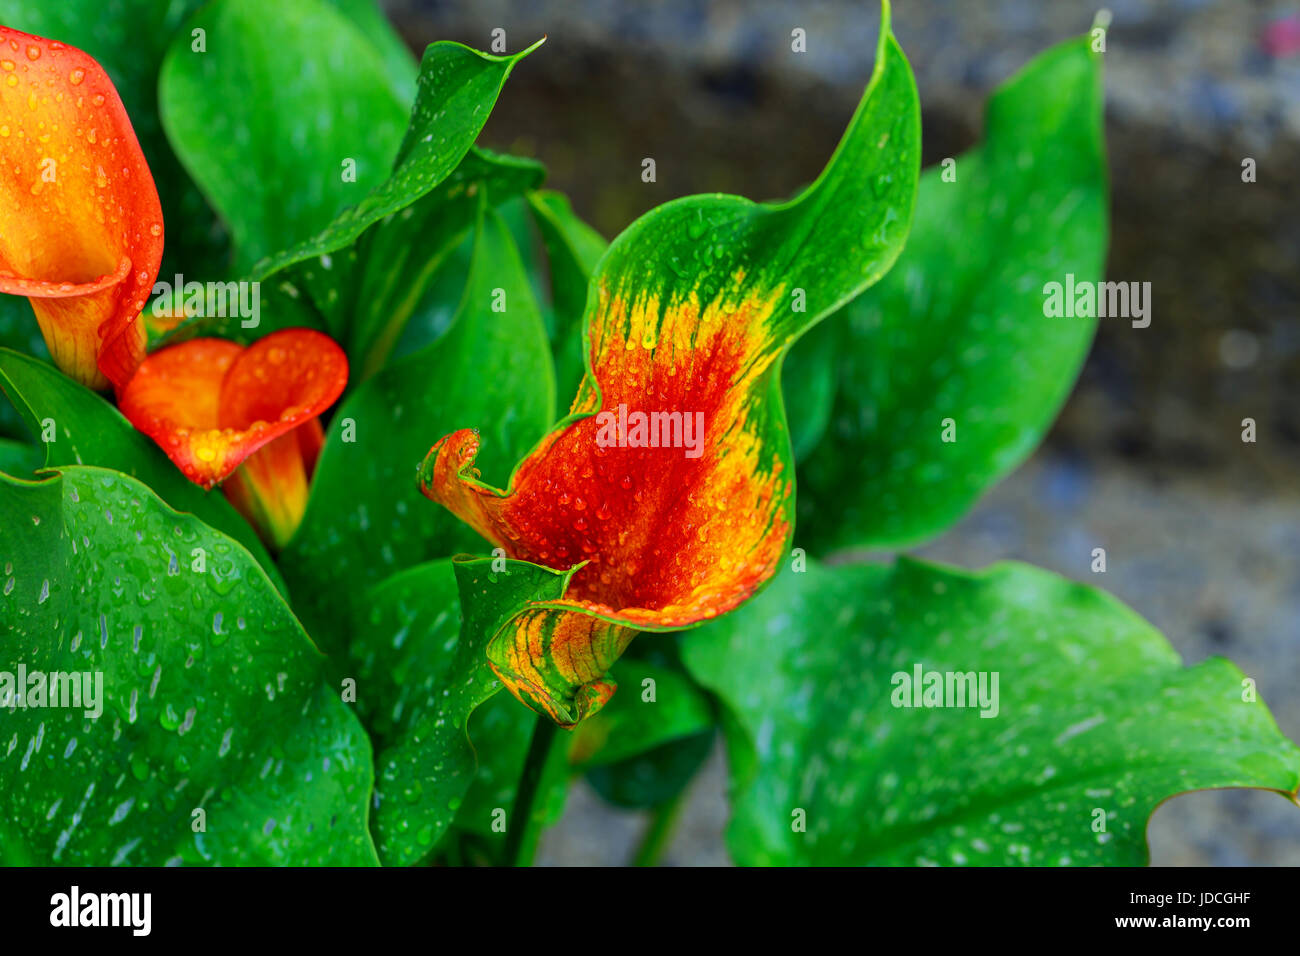 the flower of an orange calla lily and partial leaf as ornament calla lily with drops Stock Photo